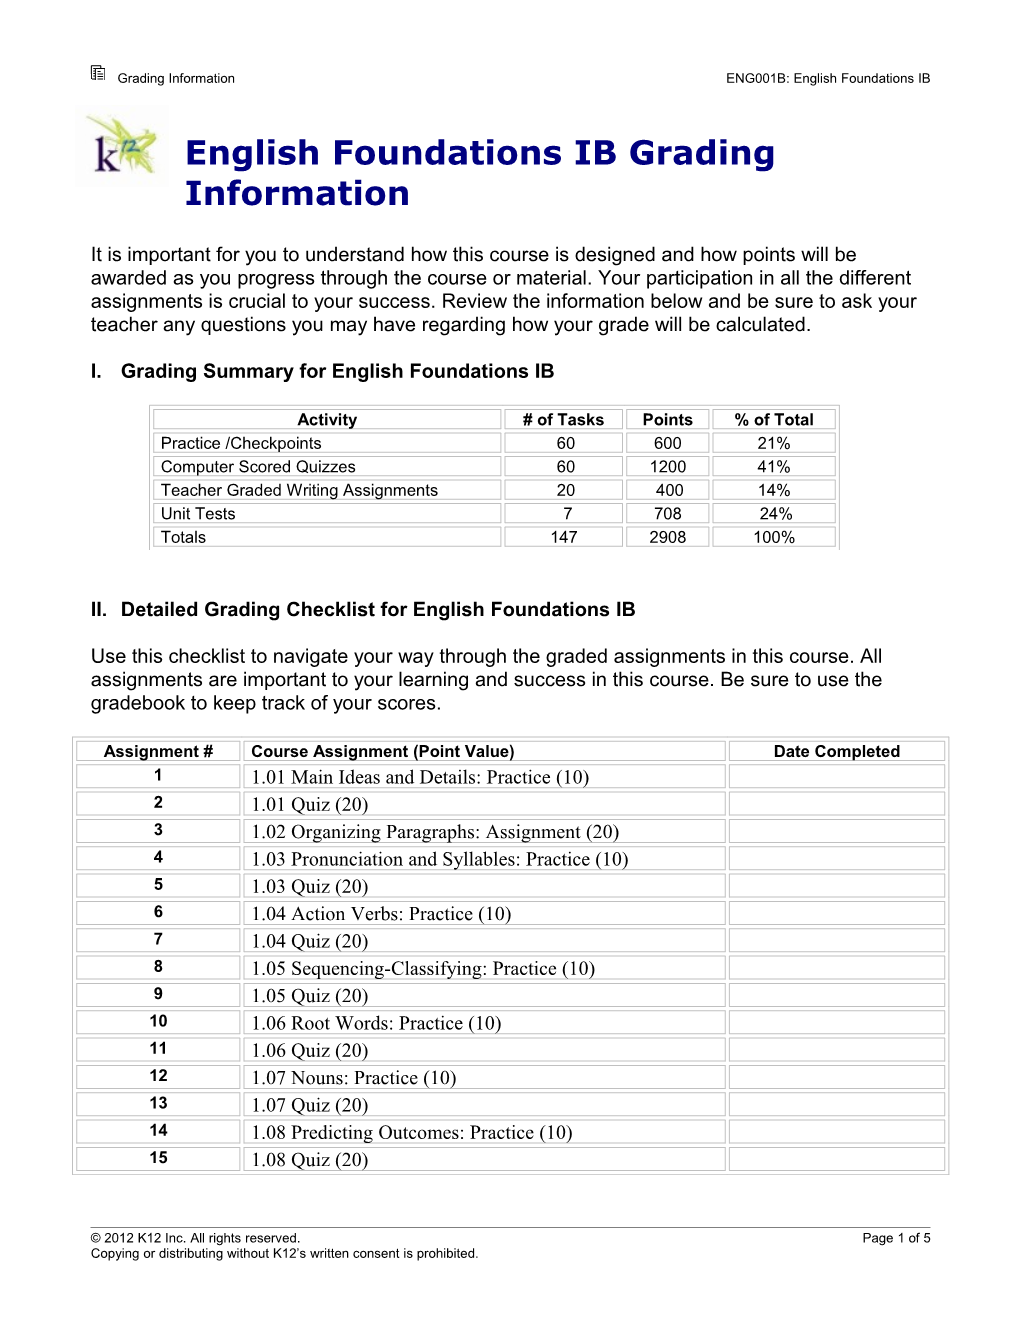 Course Name Grading Information